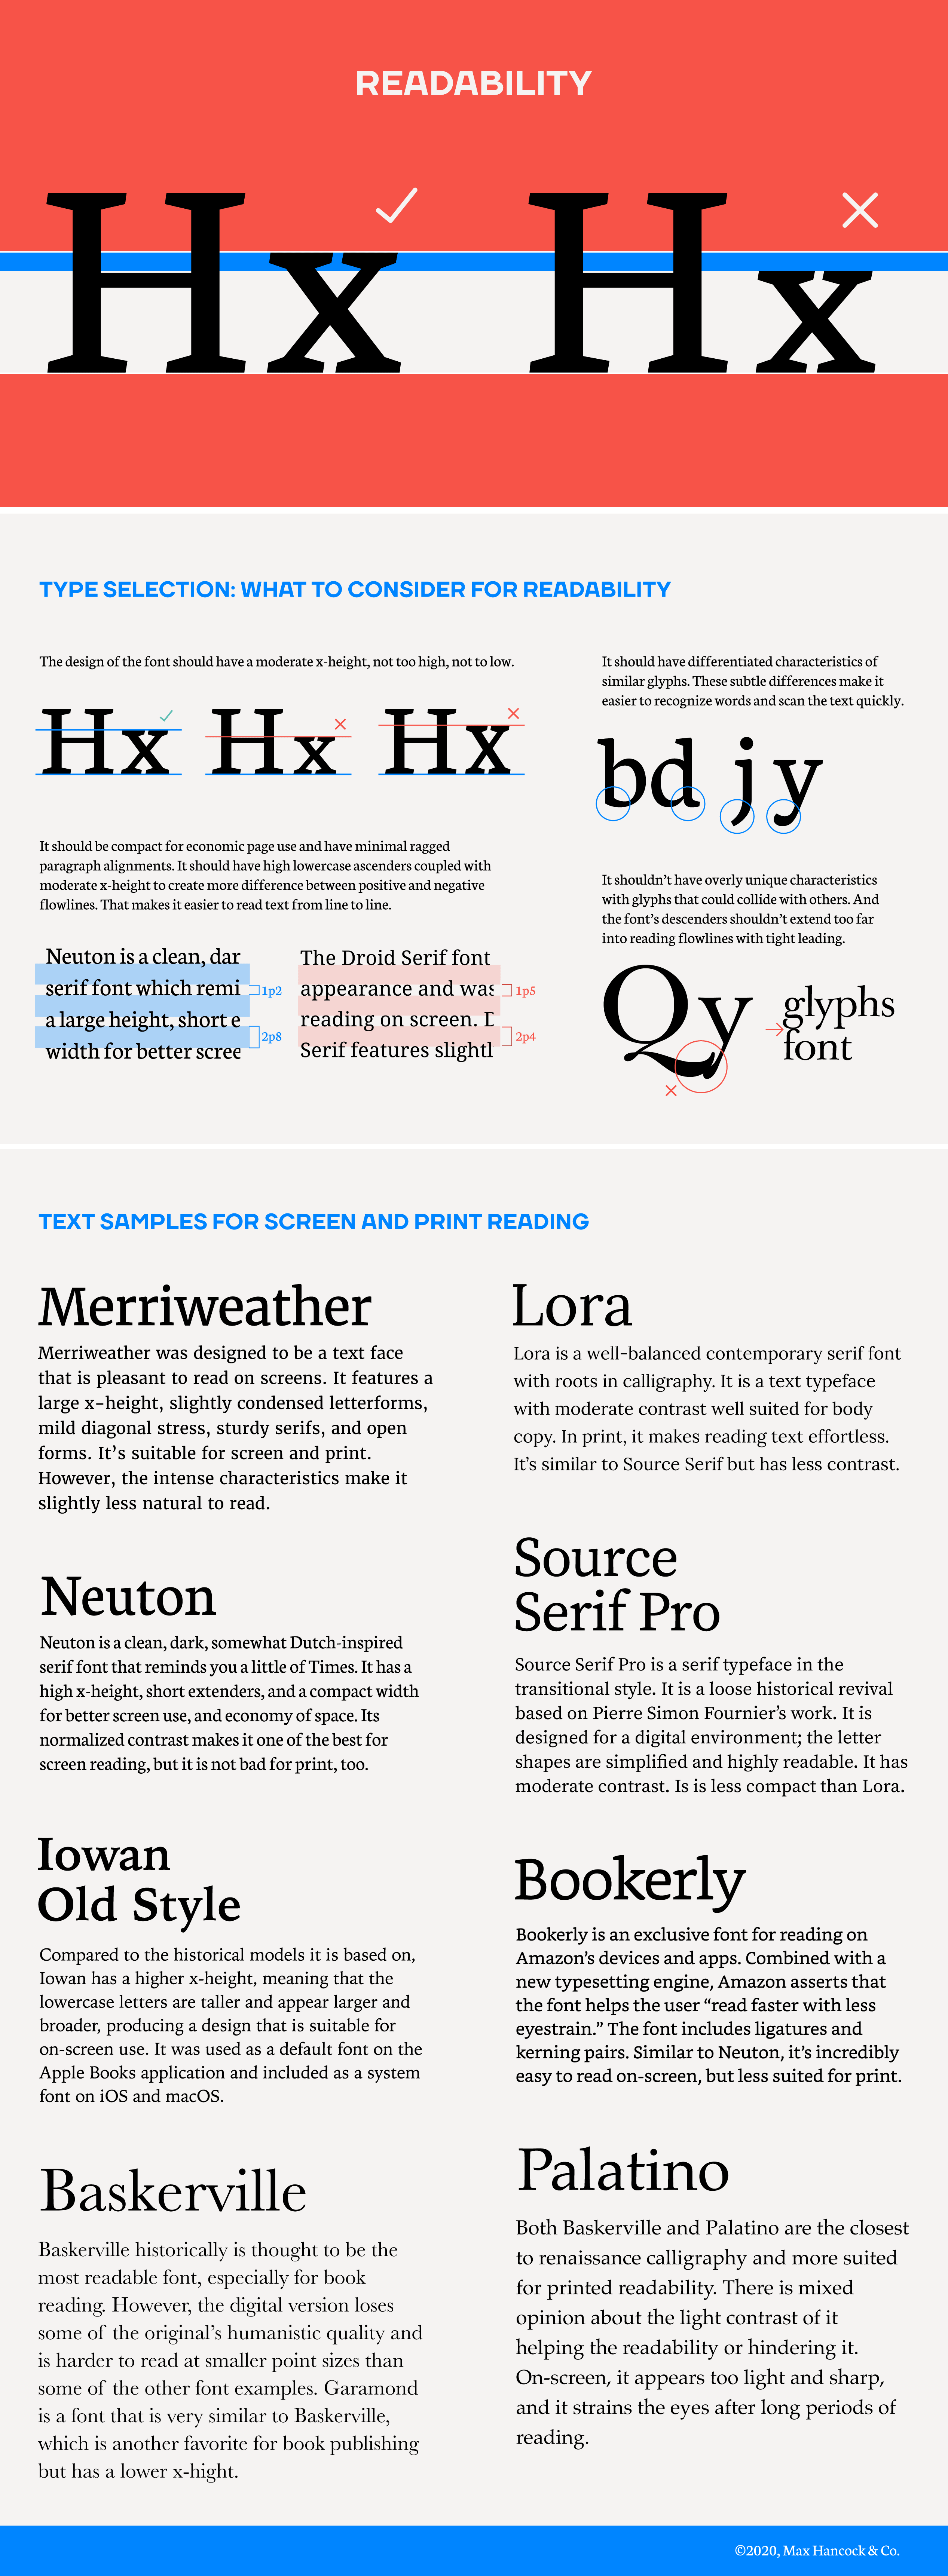 Text readability infographic